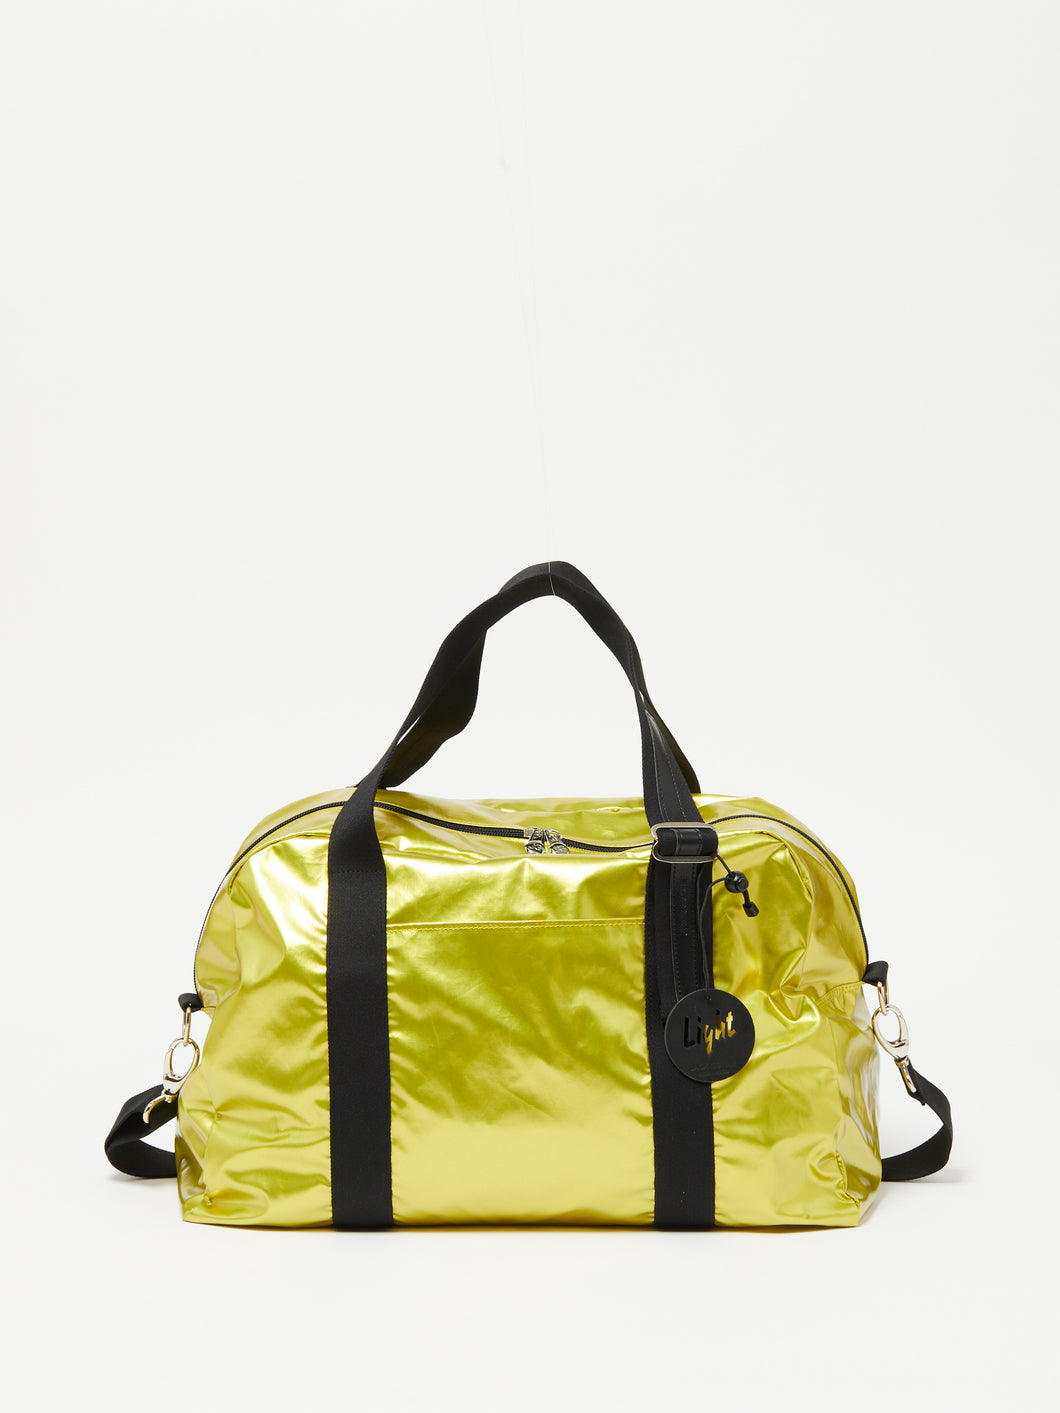 Ultra Light Performance Duffel in Citron, Jack Gomme